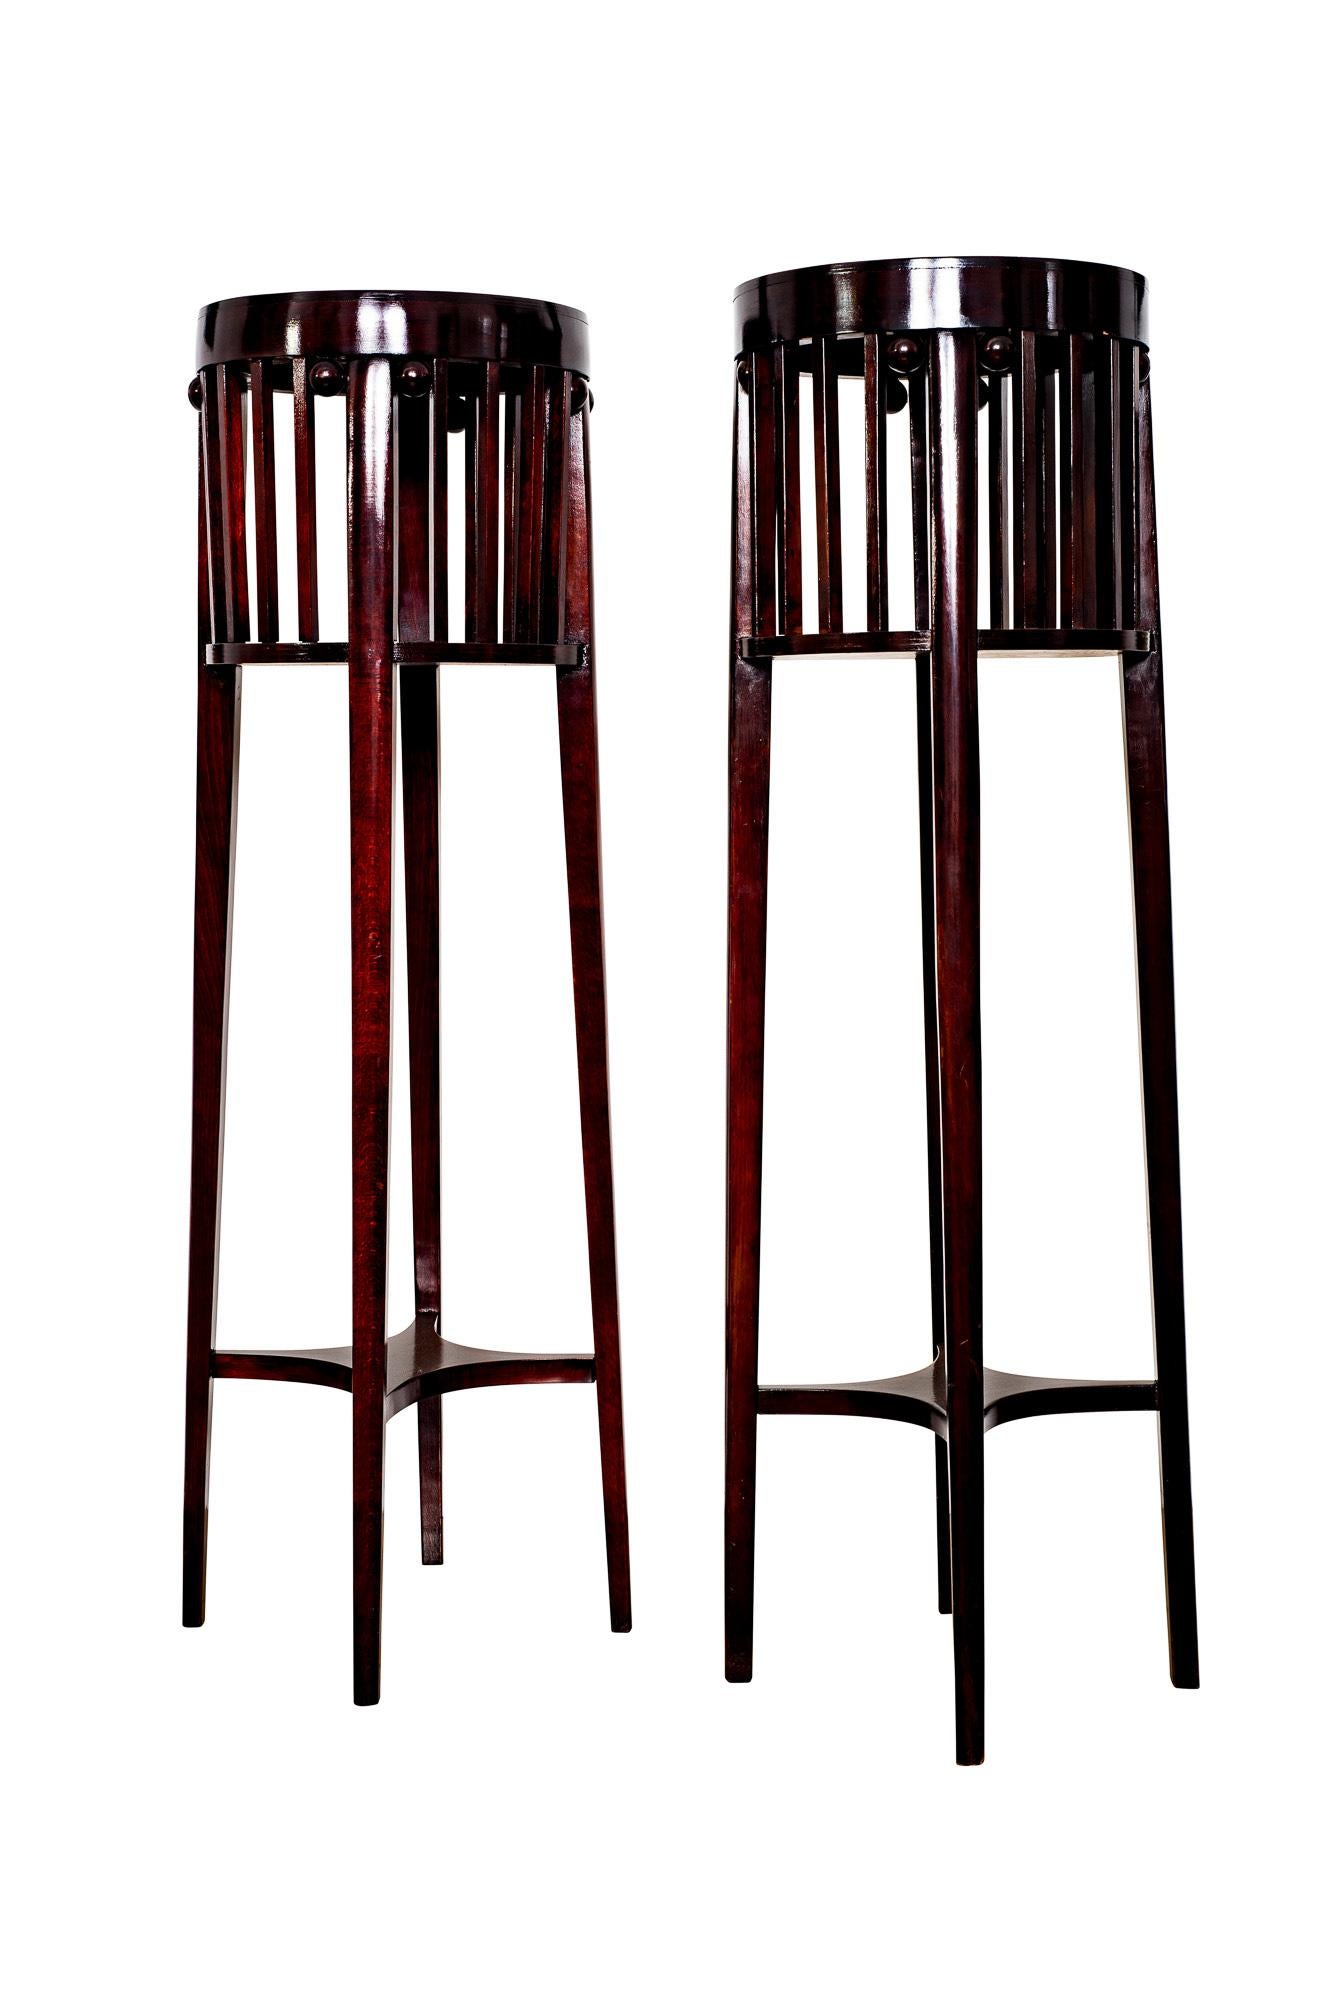 Josef Hoffmann and Gustav Siegel both worked in the atelier of Otto Wagner in the time, circa 1900. Many interior designs, that came from this workshop, show the style of those two important artists. These two flower-stands display style elements